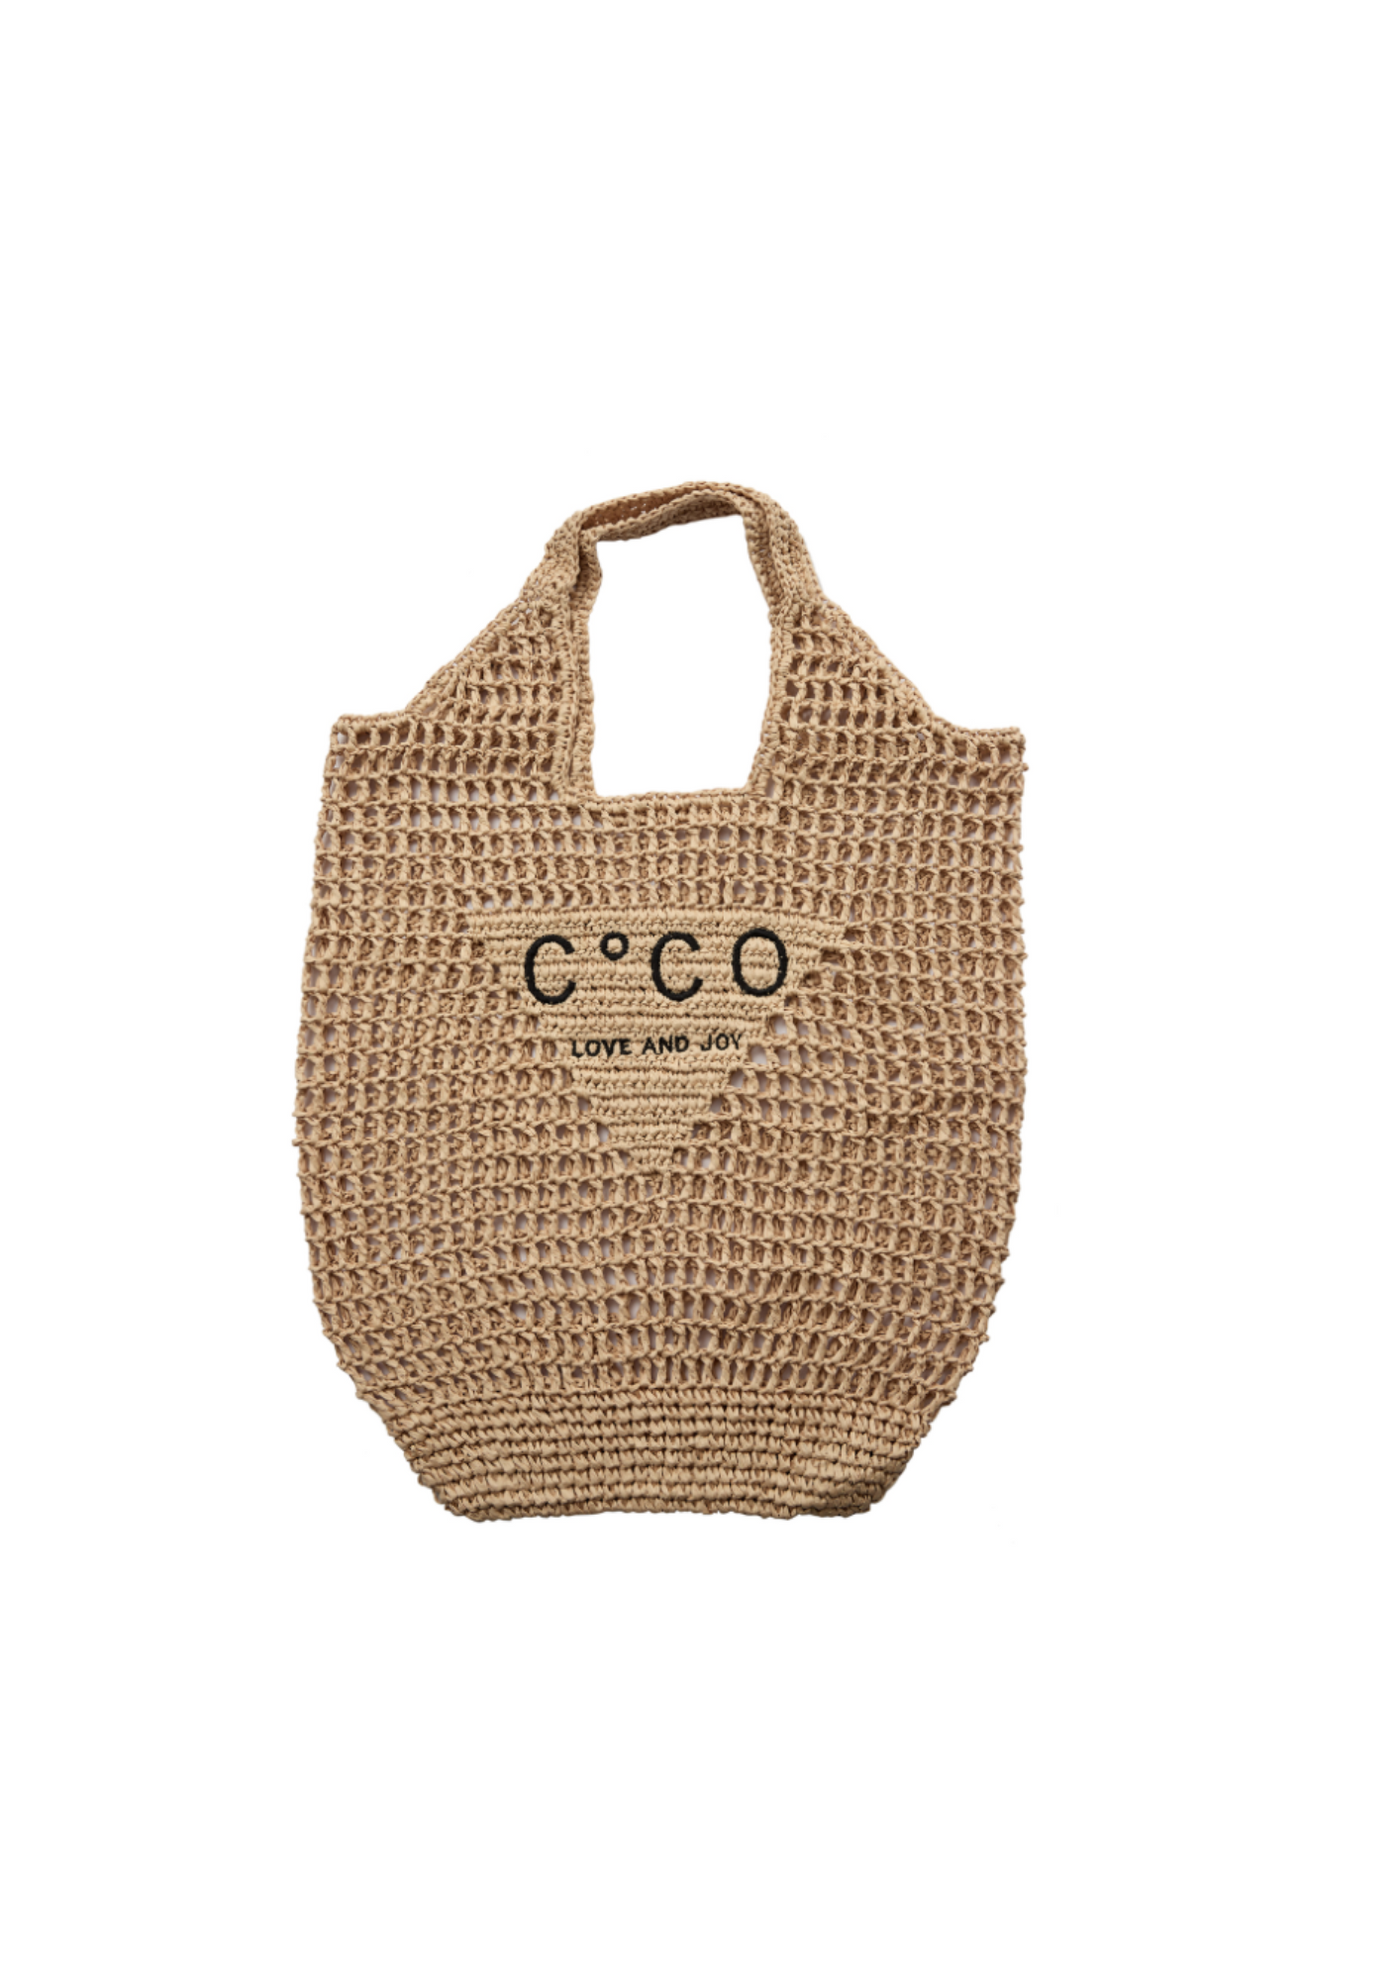 Co' Couture |  CocoCC Straw Tote Bag Straw